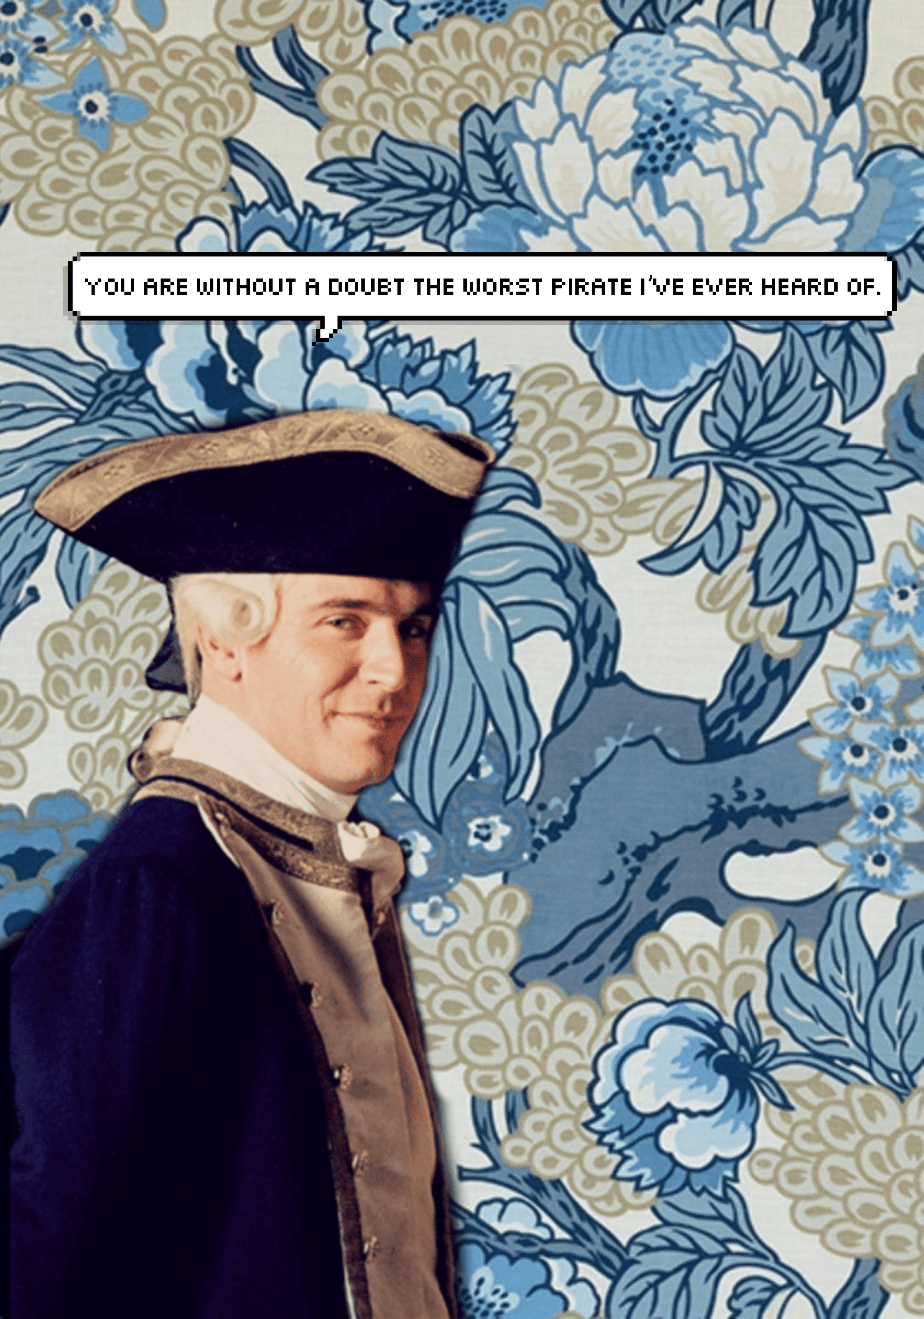 A man in blue and white clothing is standing next to an image of flowers - Pirate